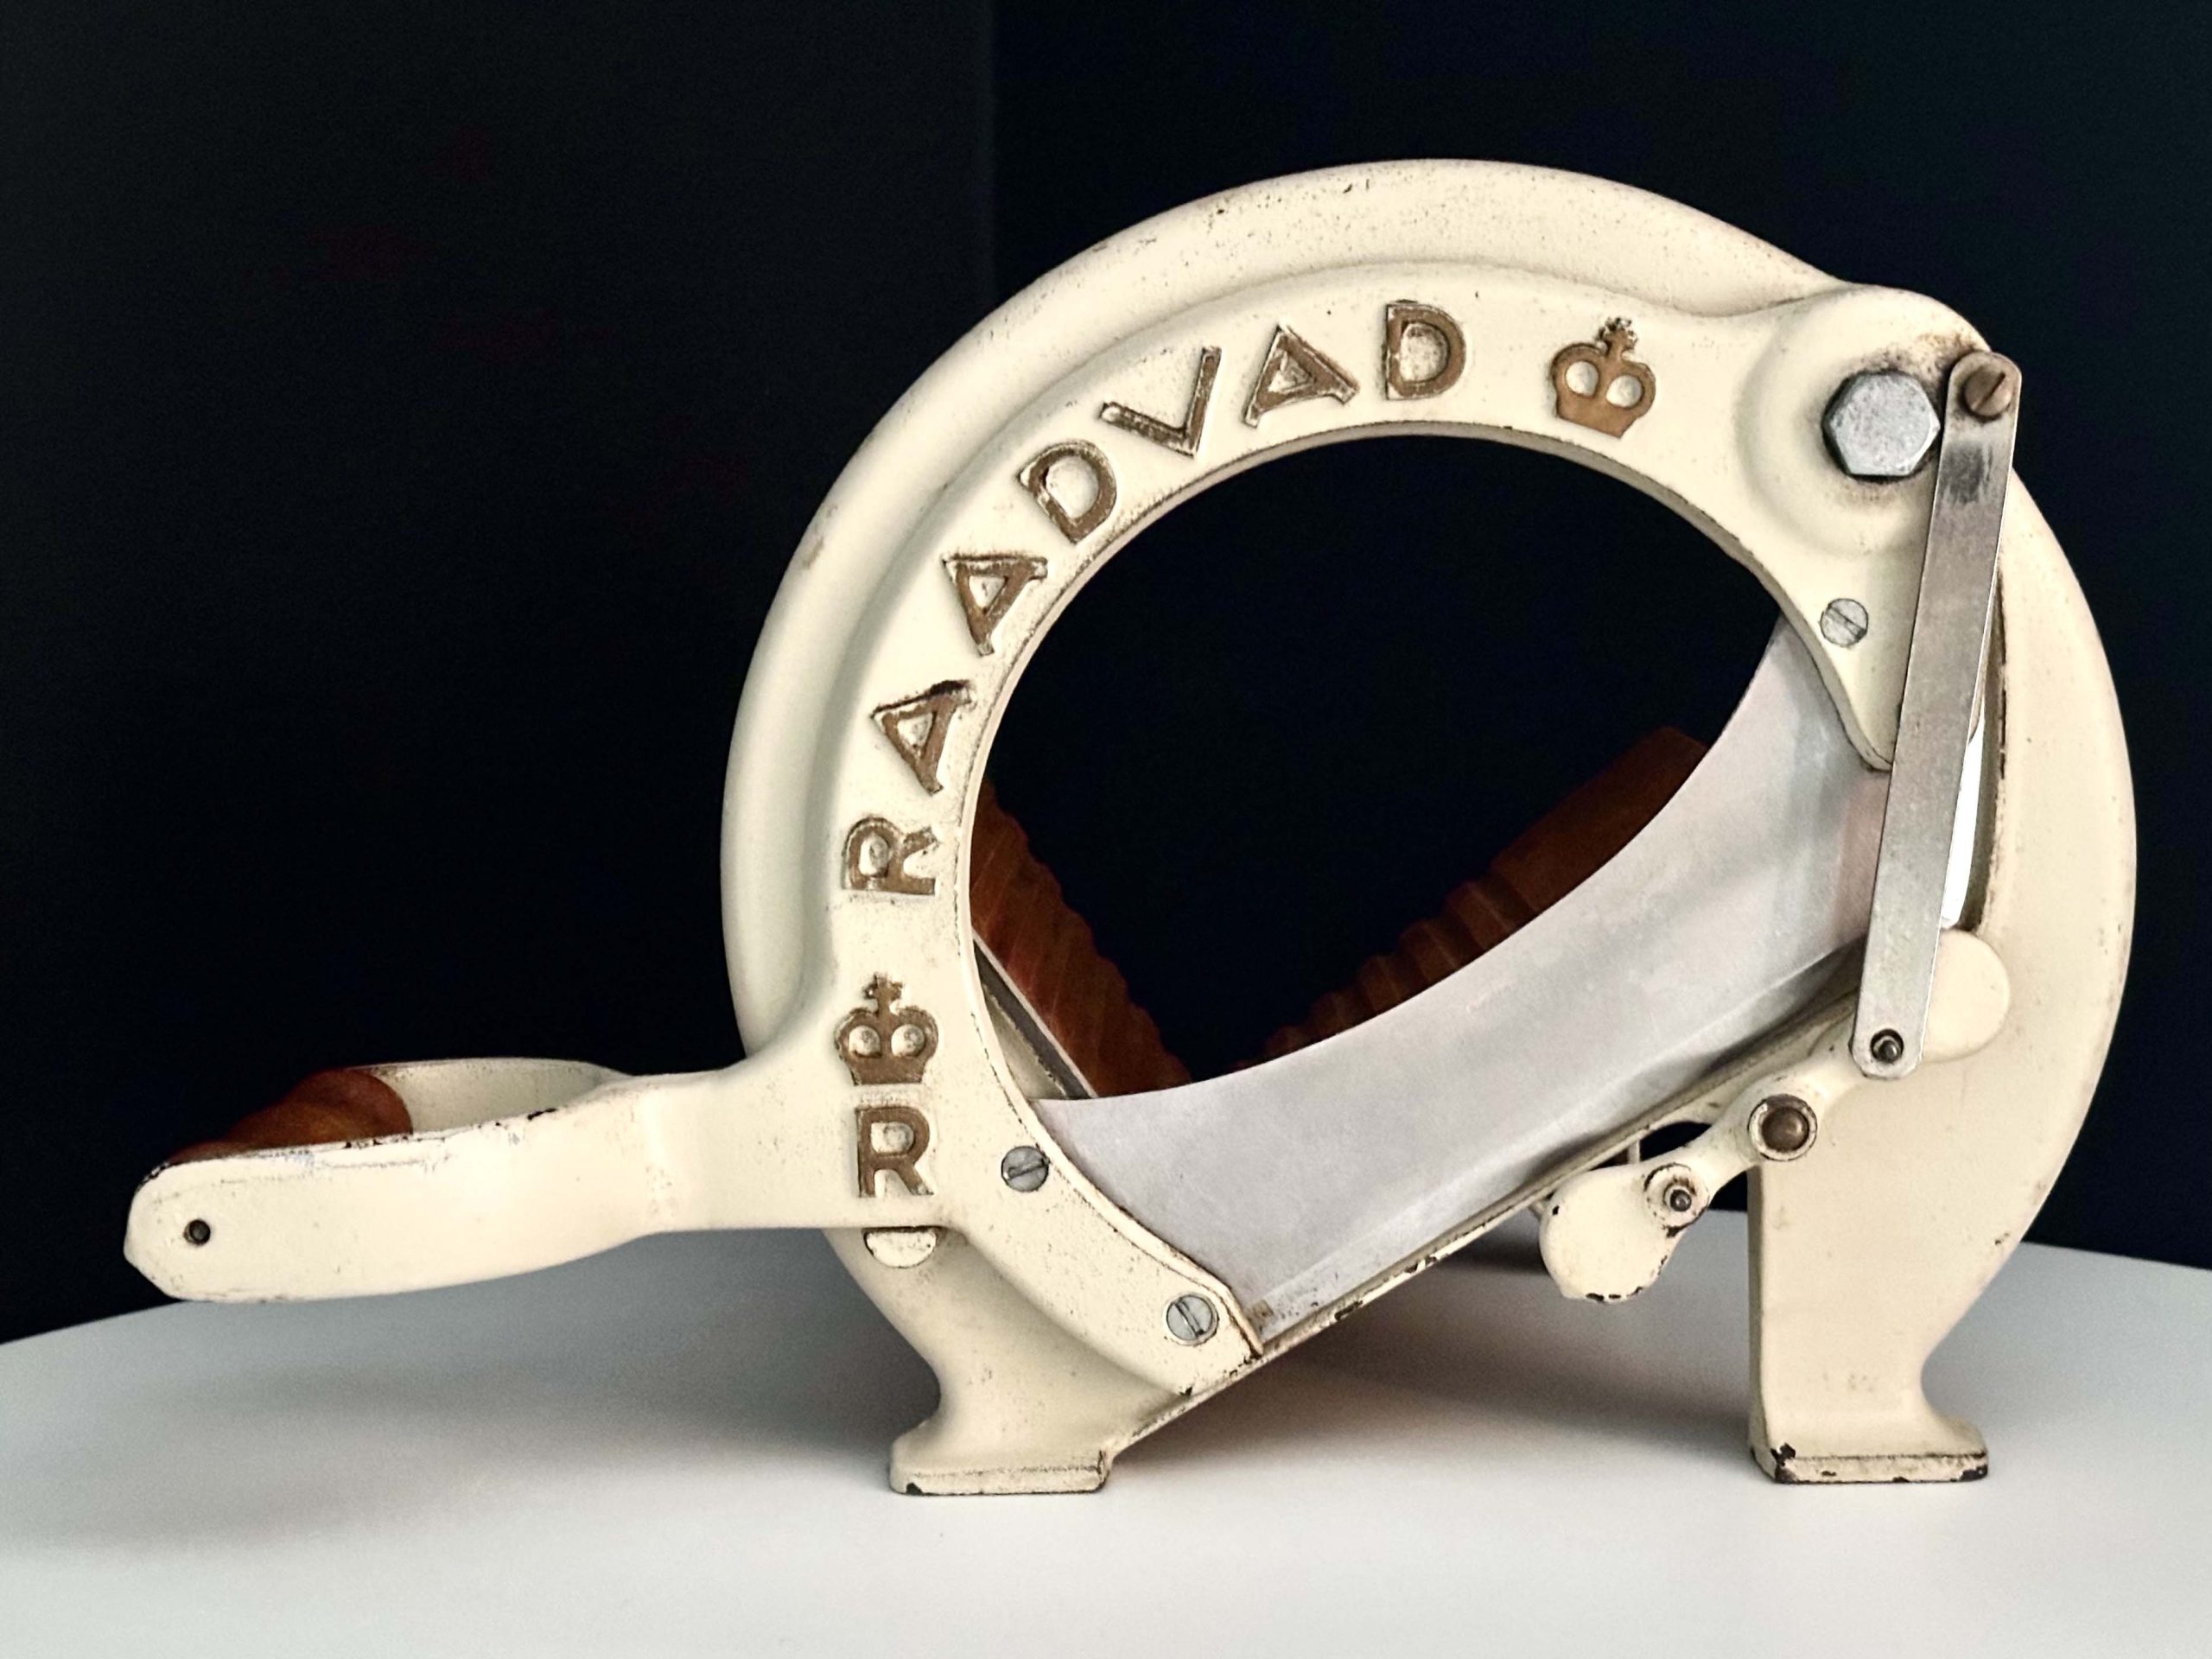 Raadvad bread slicer beige with gold letters Danish living